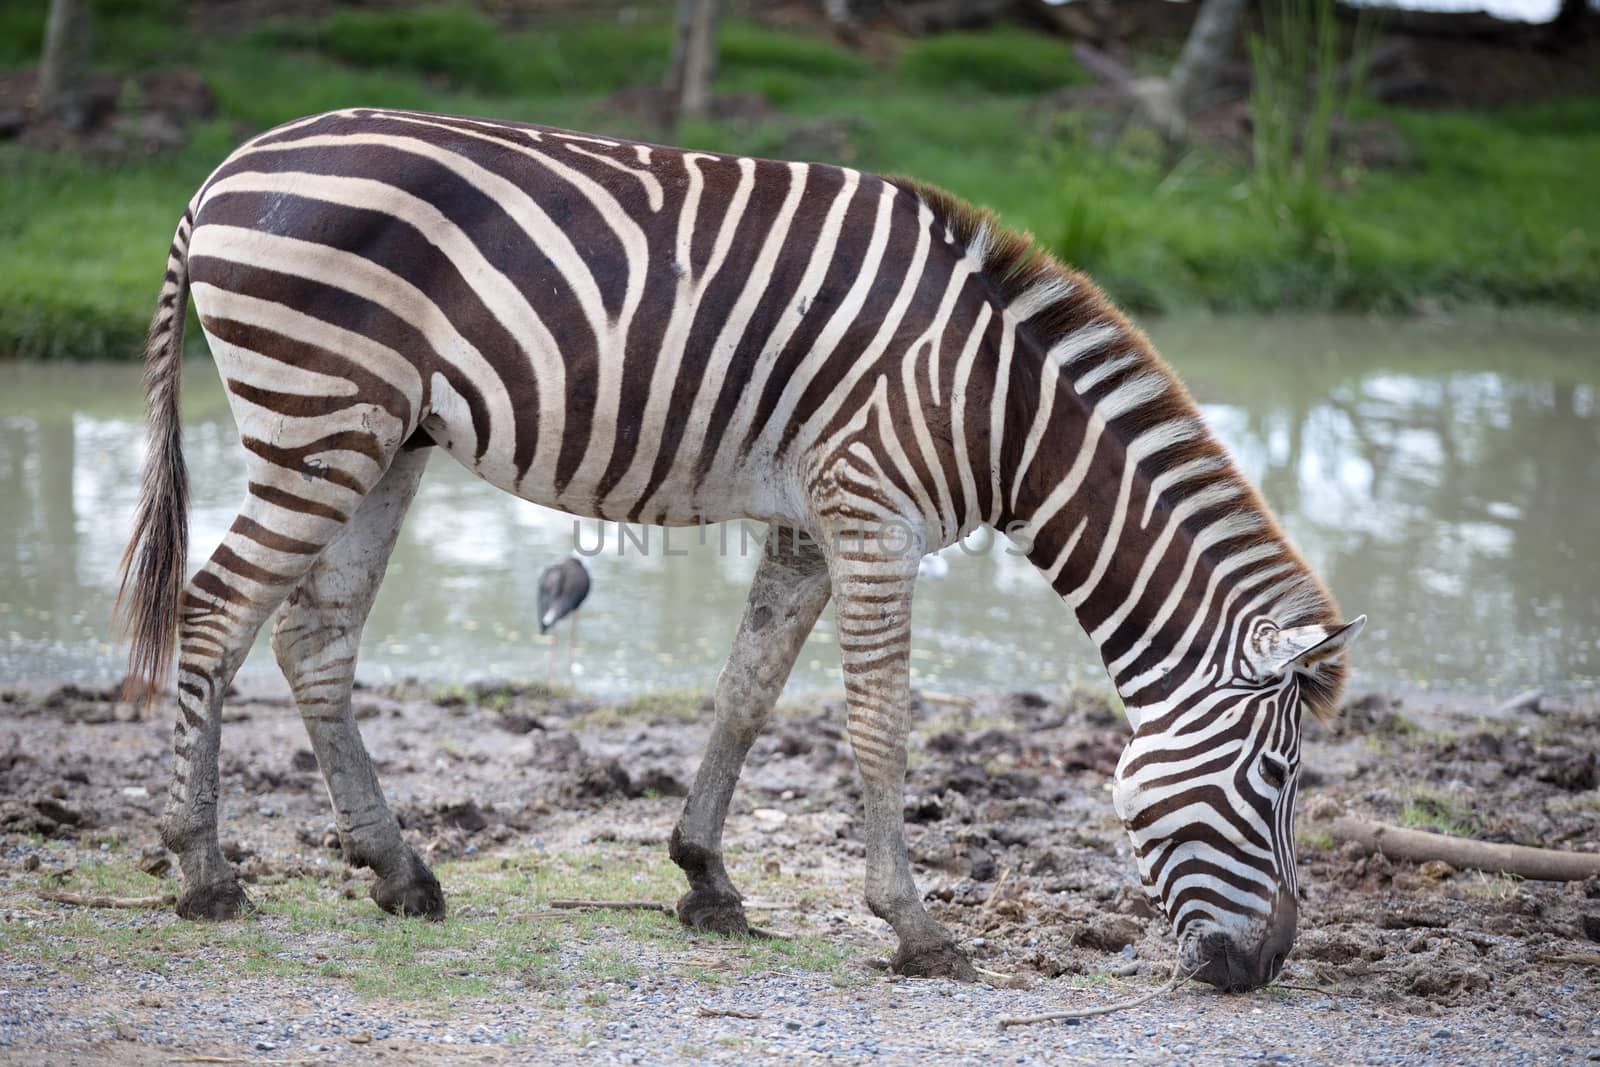 A zebra eating grass in the daytime near a swamp